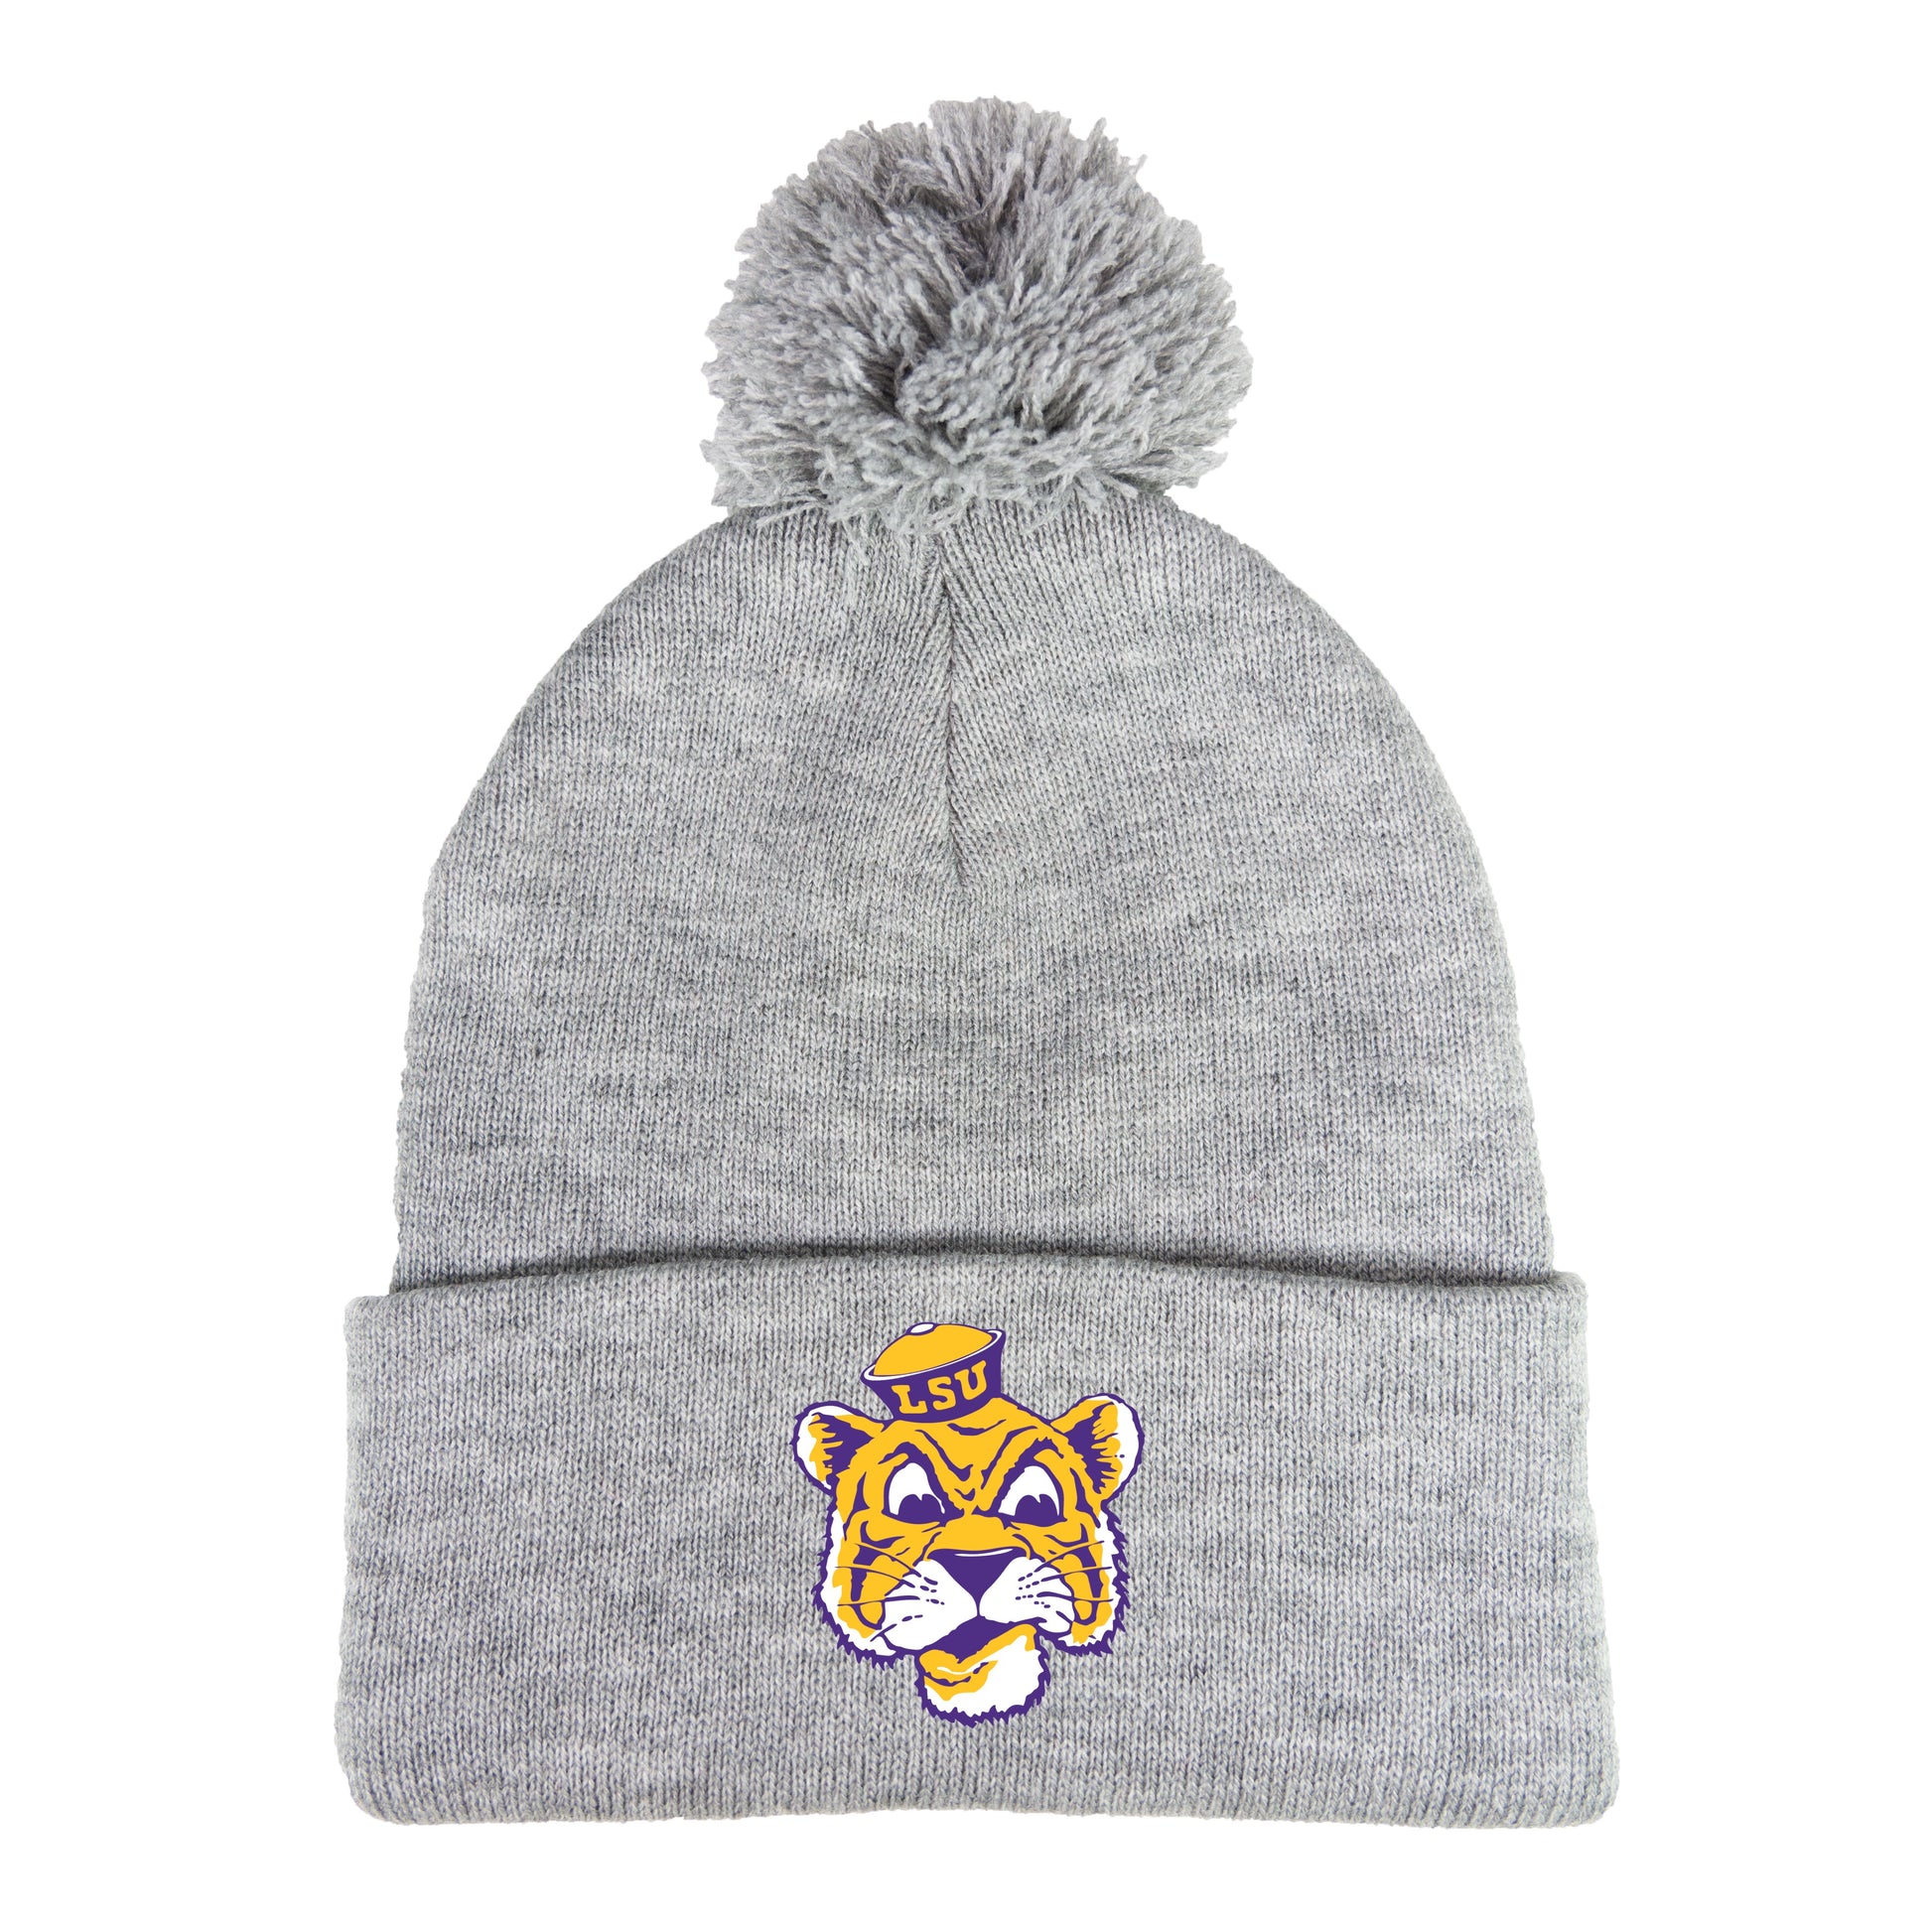 LSU Sailor Mike Classic 3D 12 in Knit Pom-Pom Top Beanie- Heather Grey - Ten Gallon Hat Co.